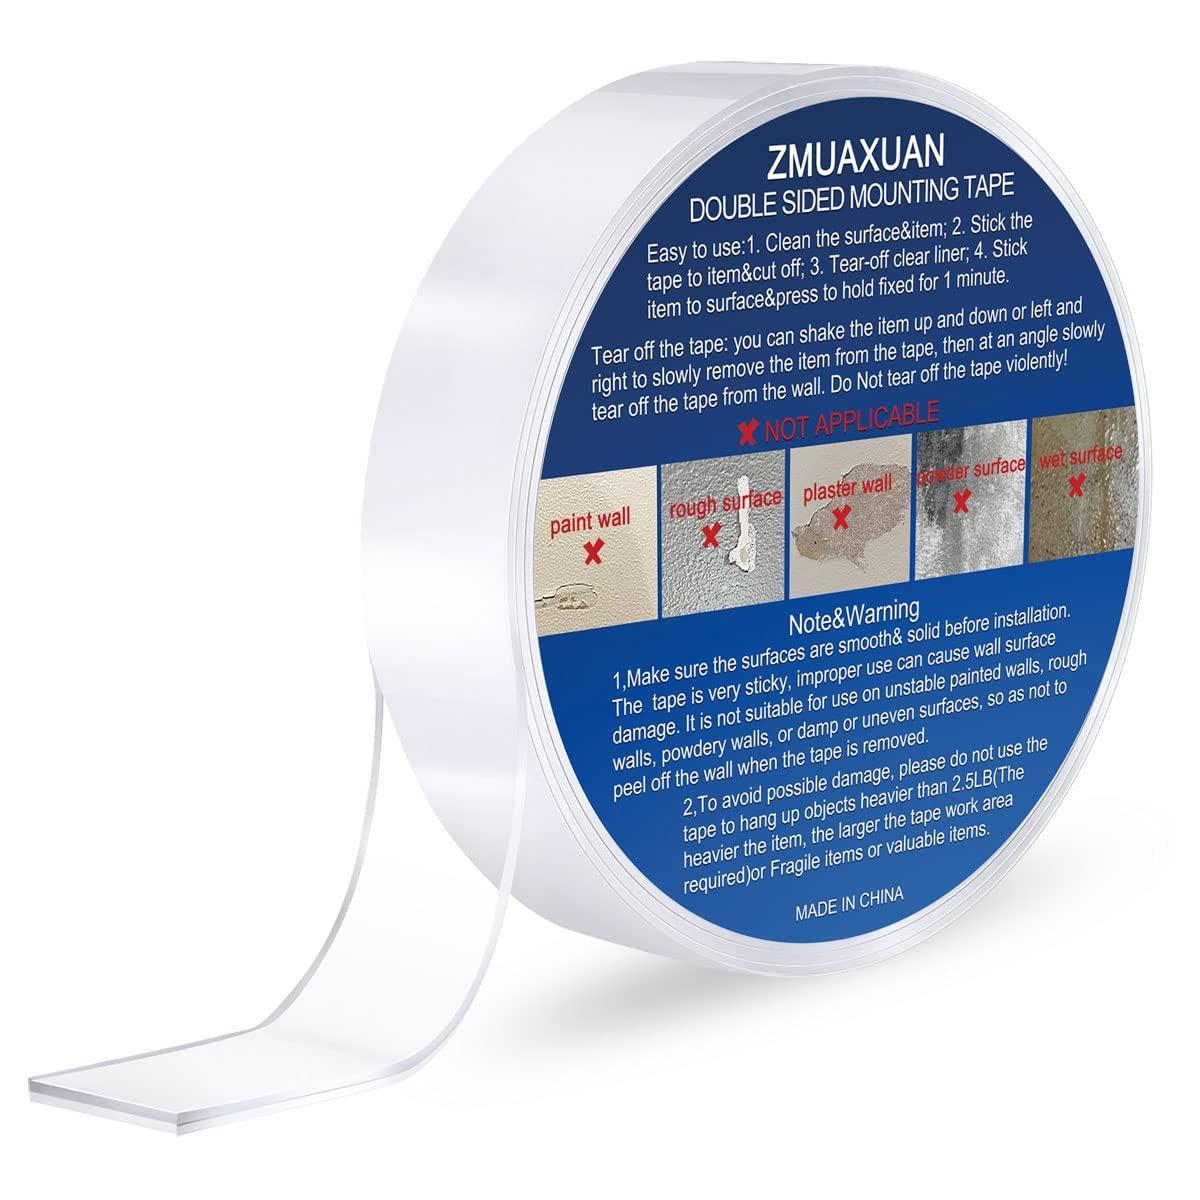 Nano Tape Double Sided Adhesive - Wall Tape Gel Sticky Tack Clear